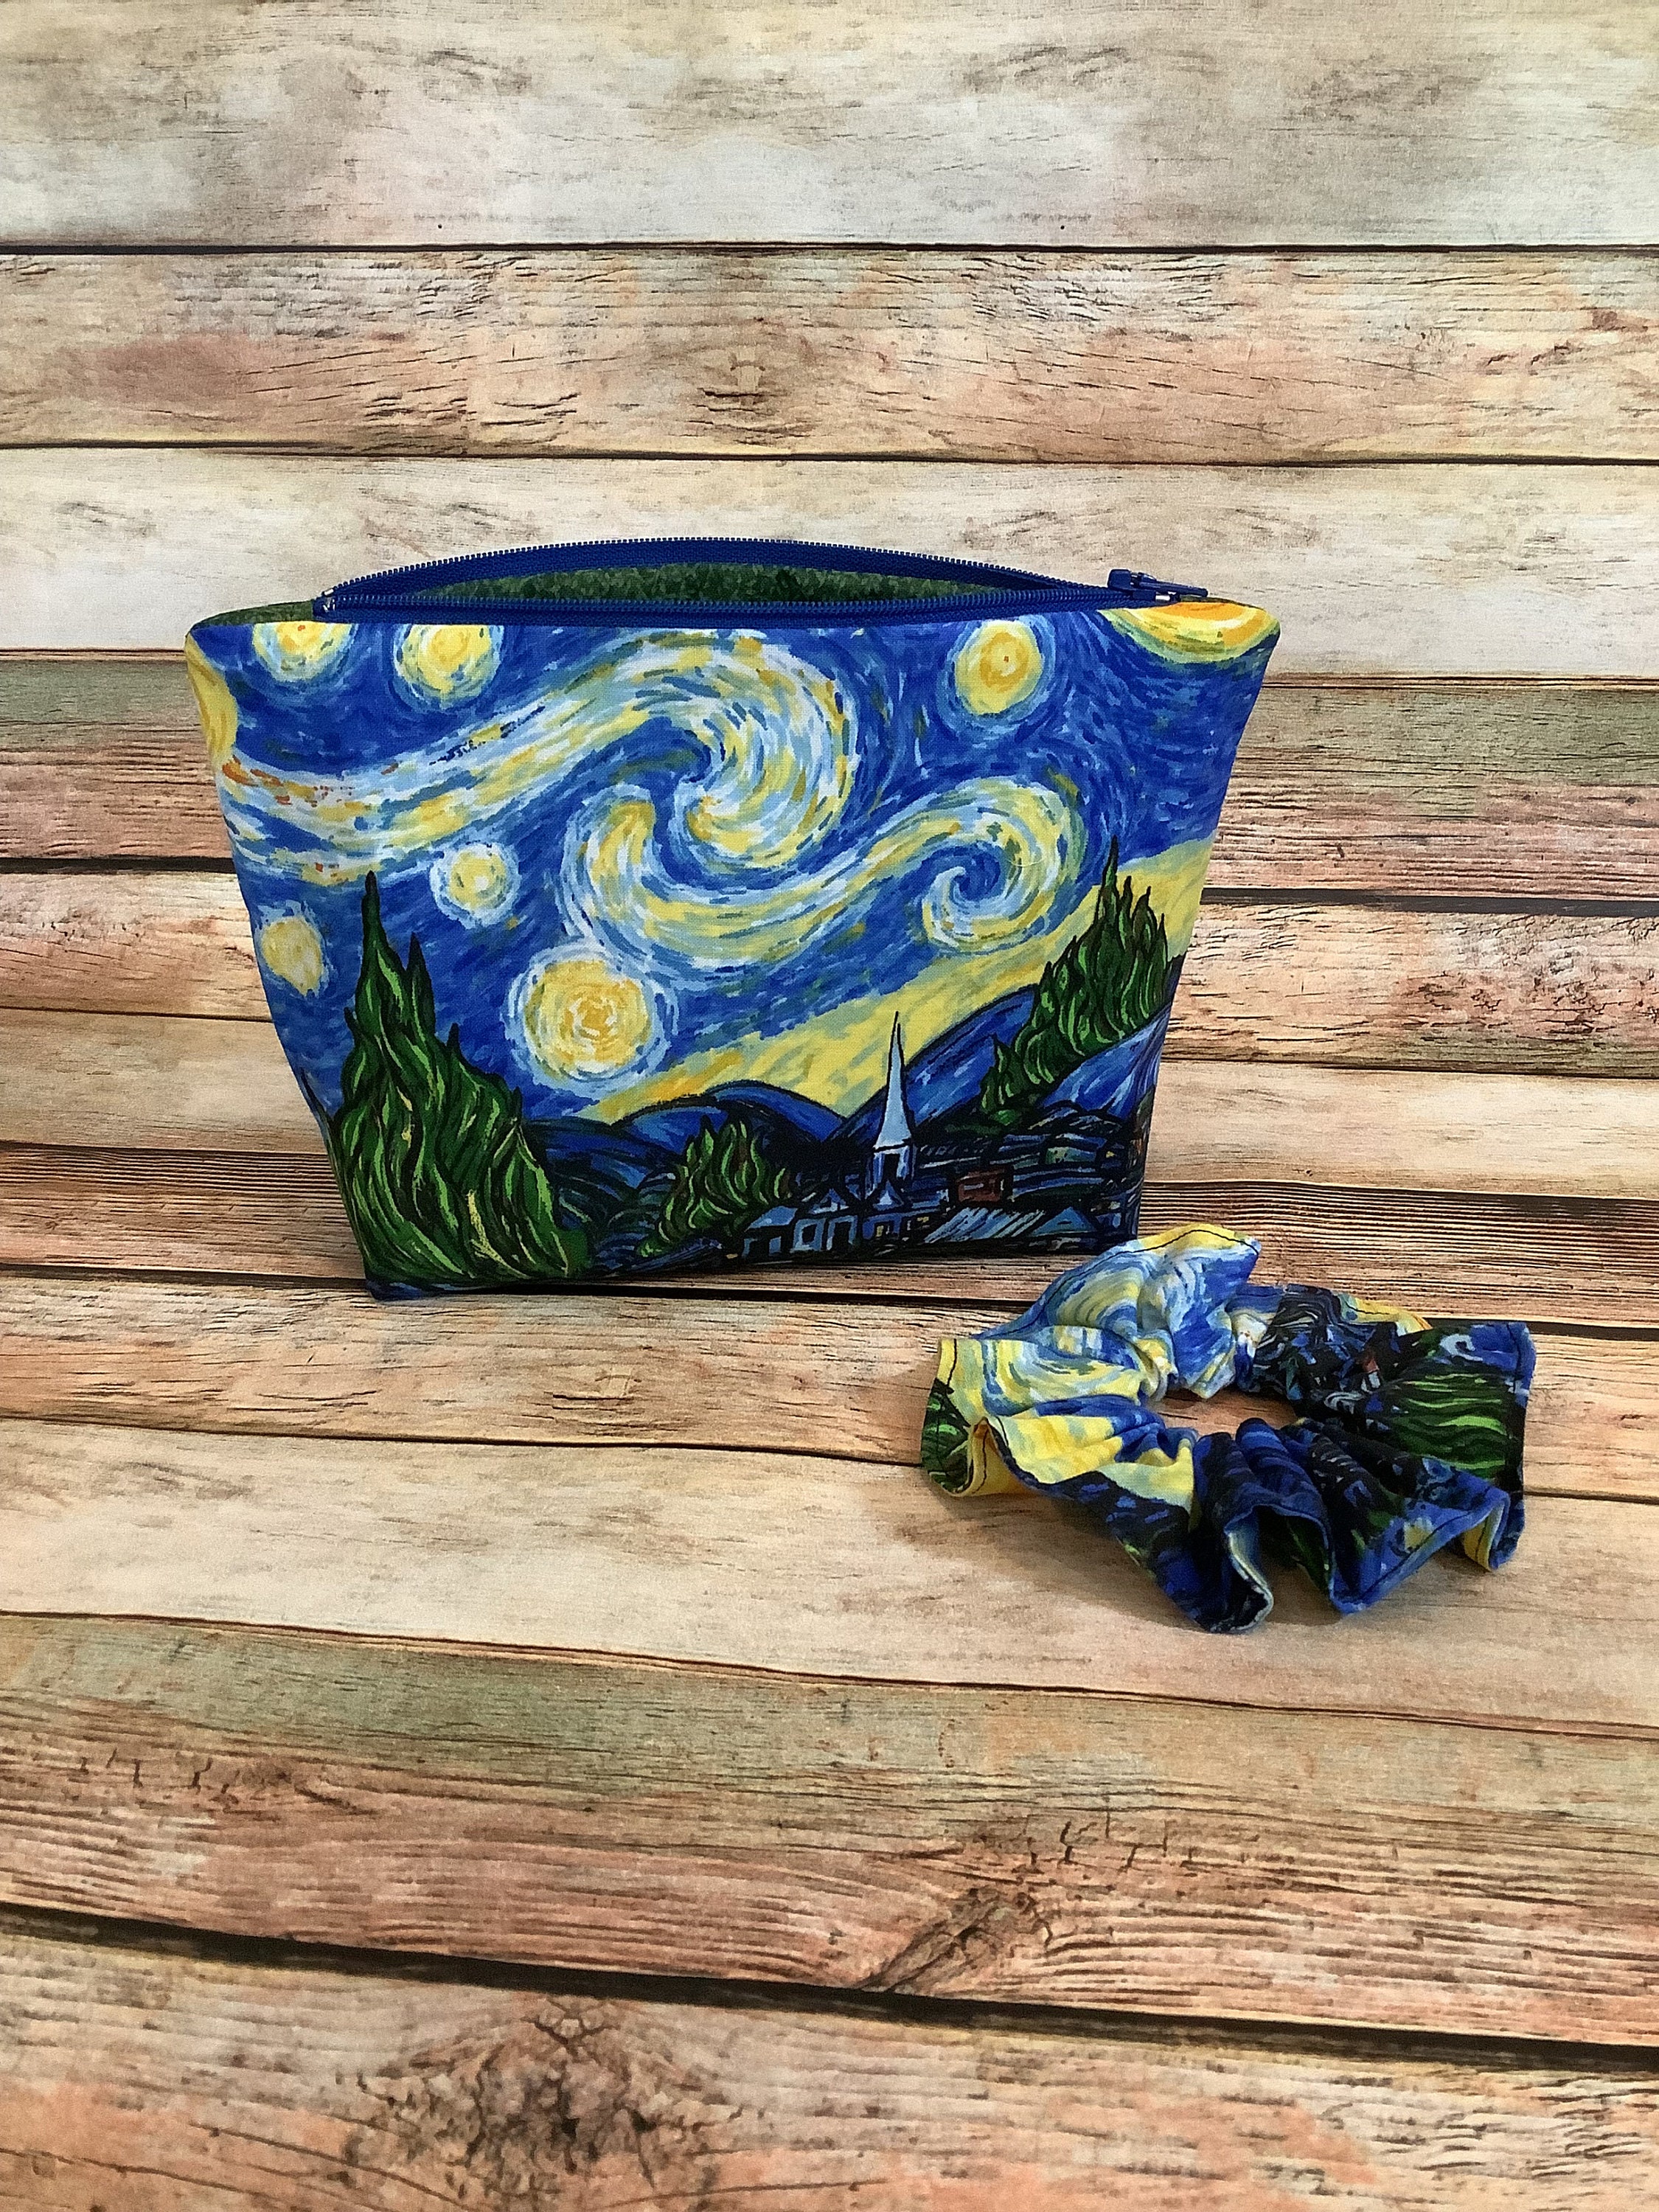 Starry Night embroidered appliquéd canvas clutch